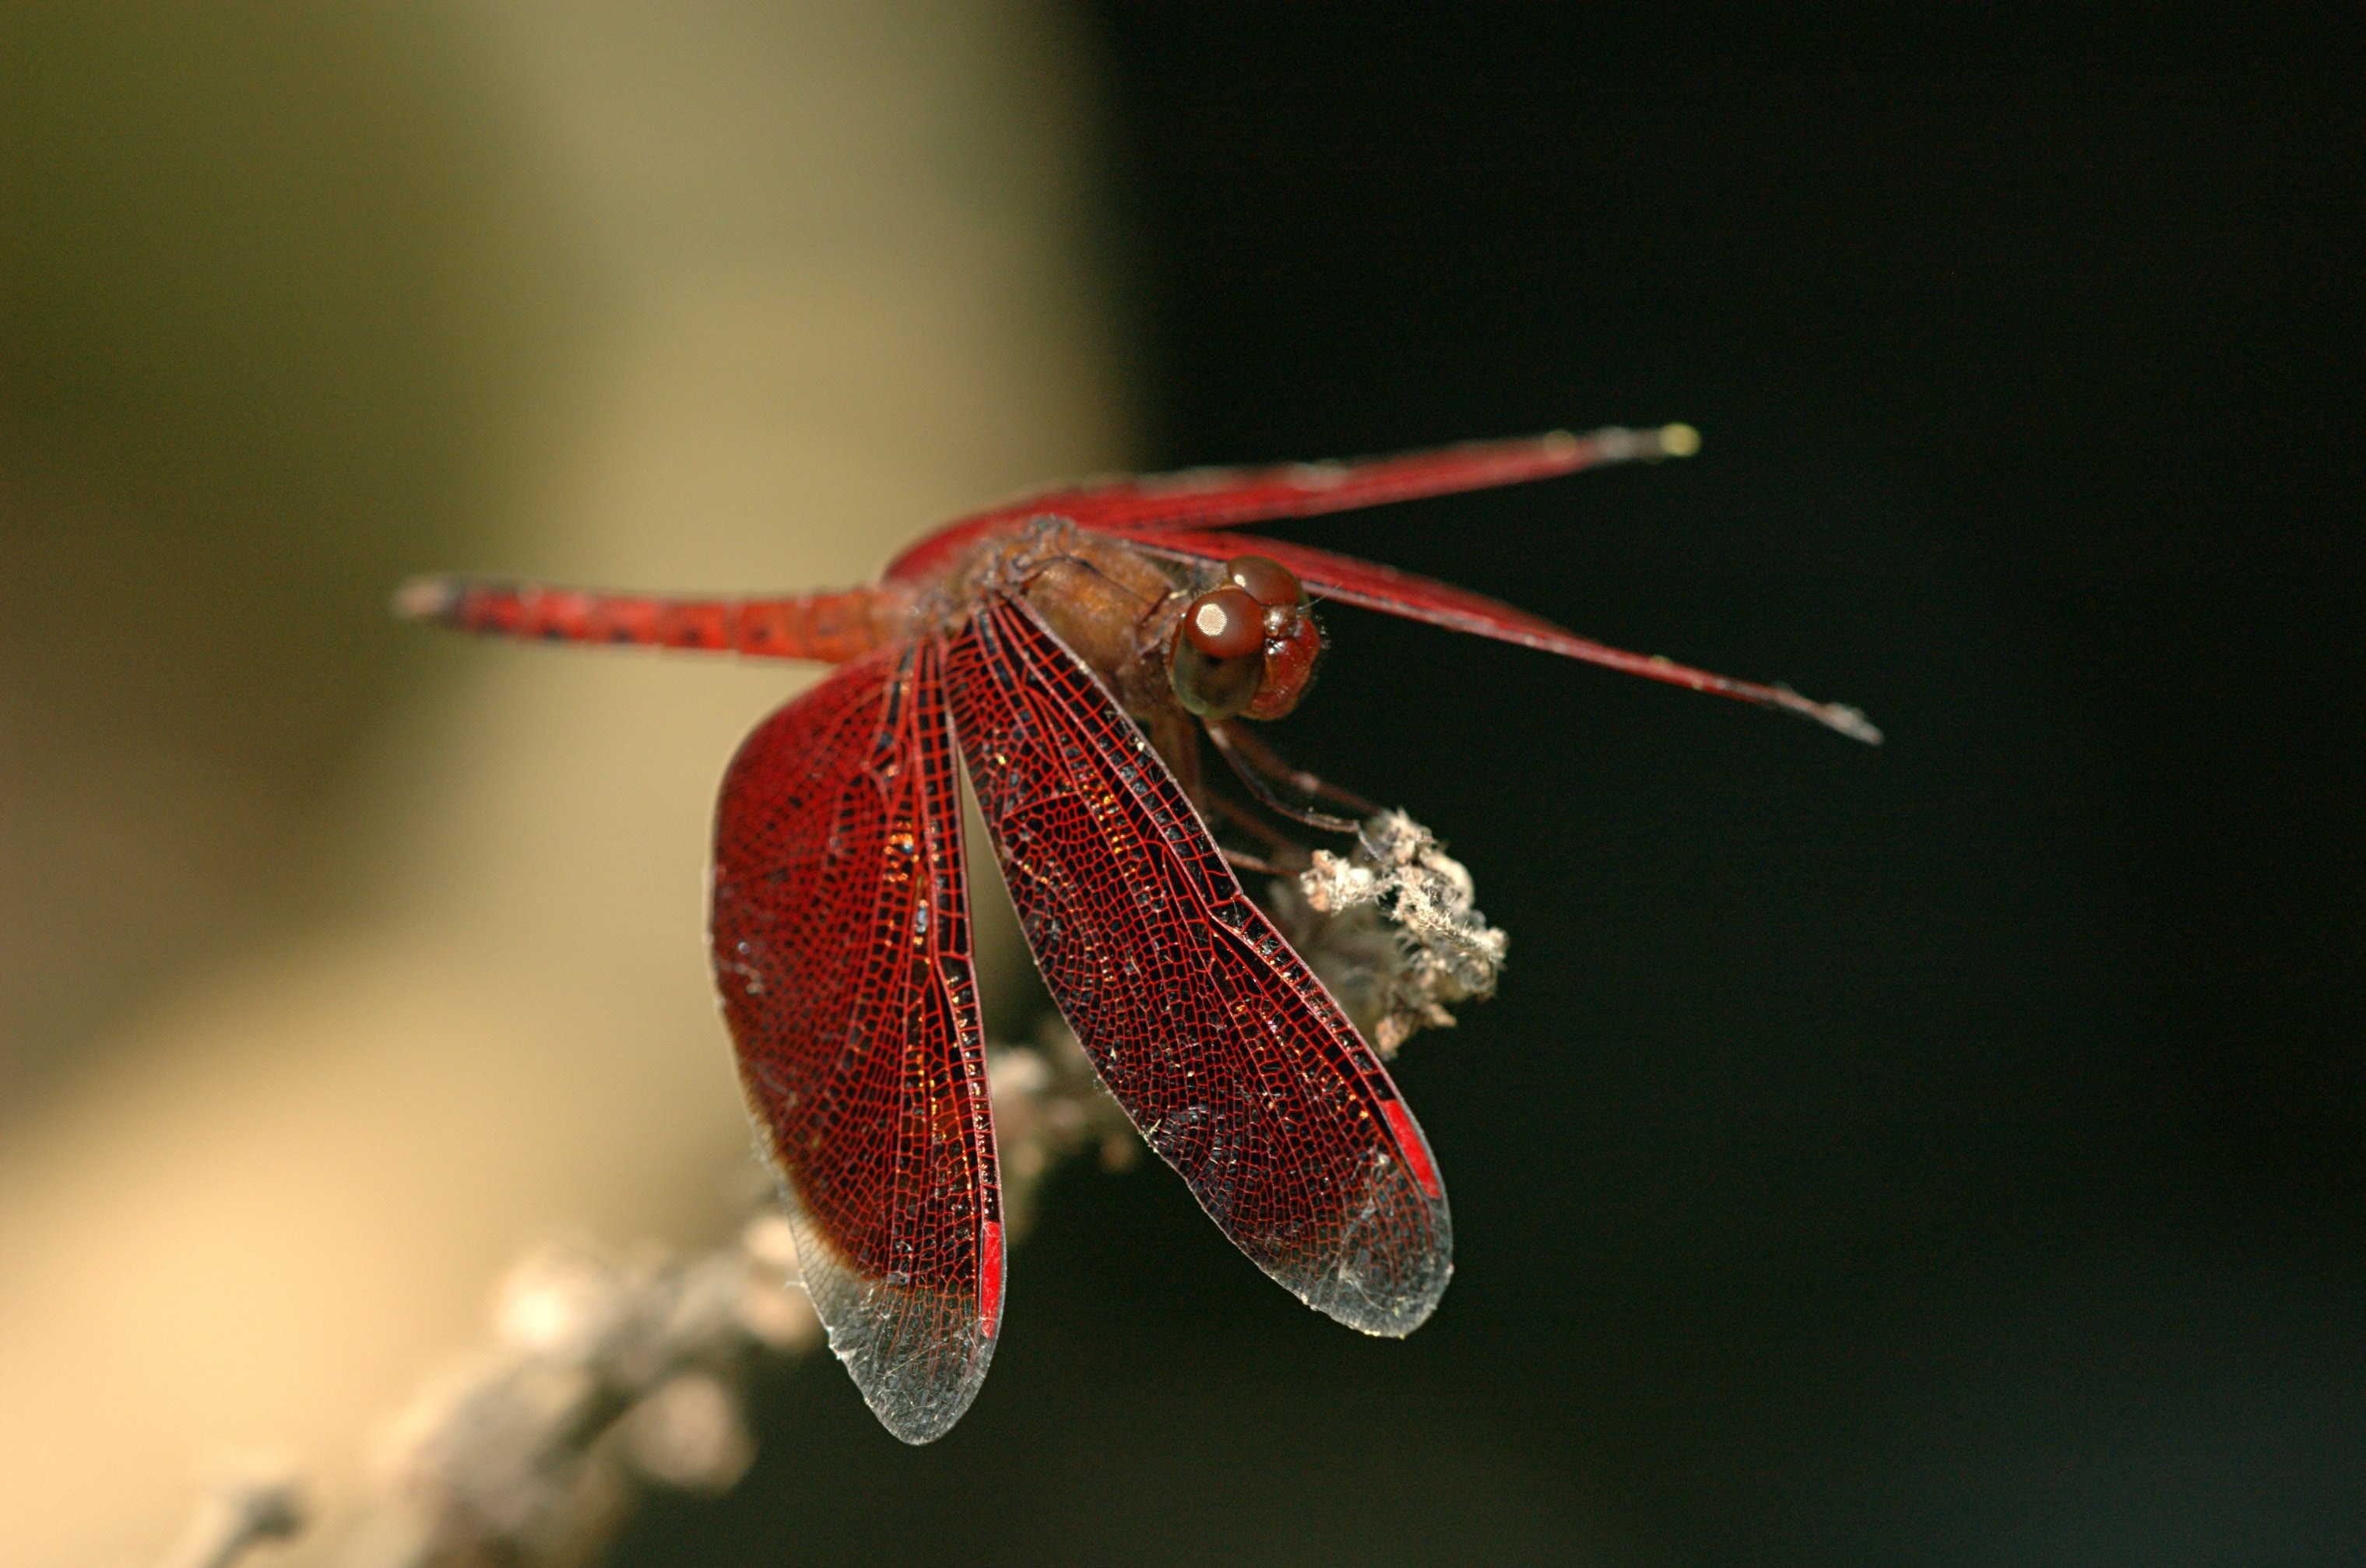 red Darter Scarlet perched on fountain plant in closeup photo